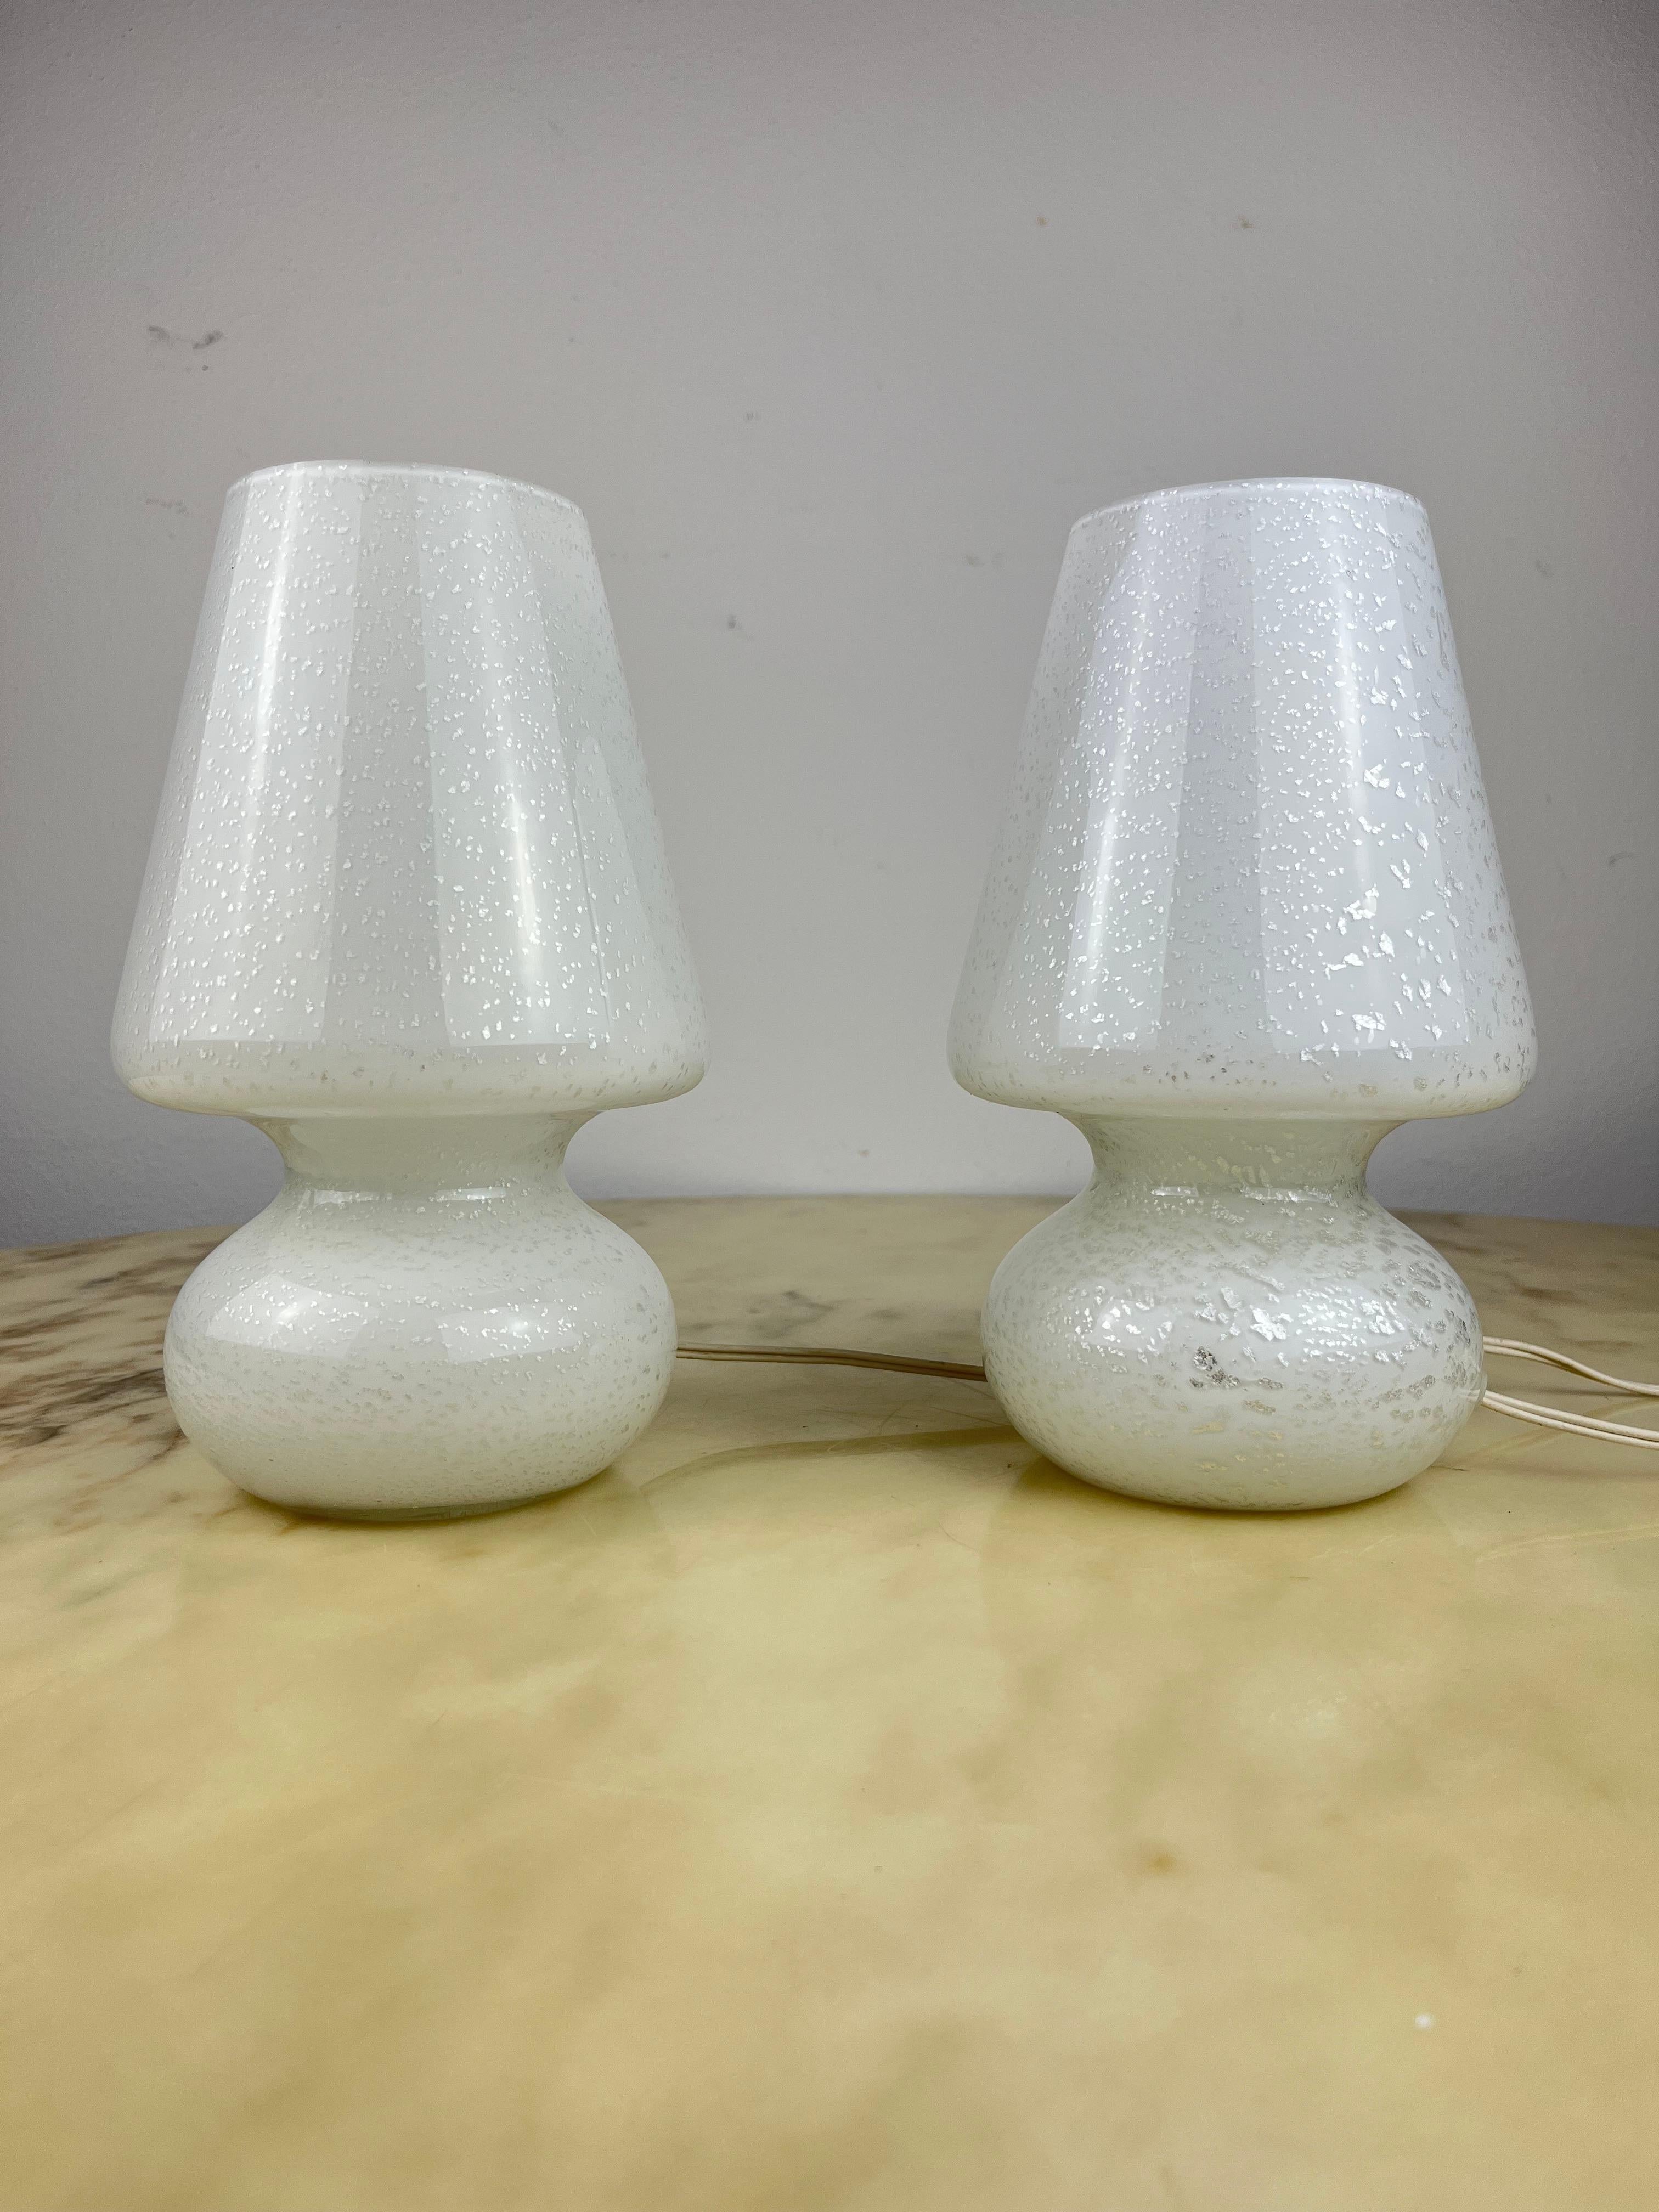 Pair of Murano glass bedside lamps, Italy, 1980s
Intact and functional, very small signs of aging. Purchased in Venice from the first owners.